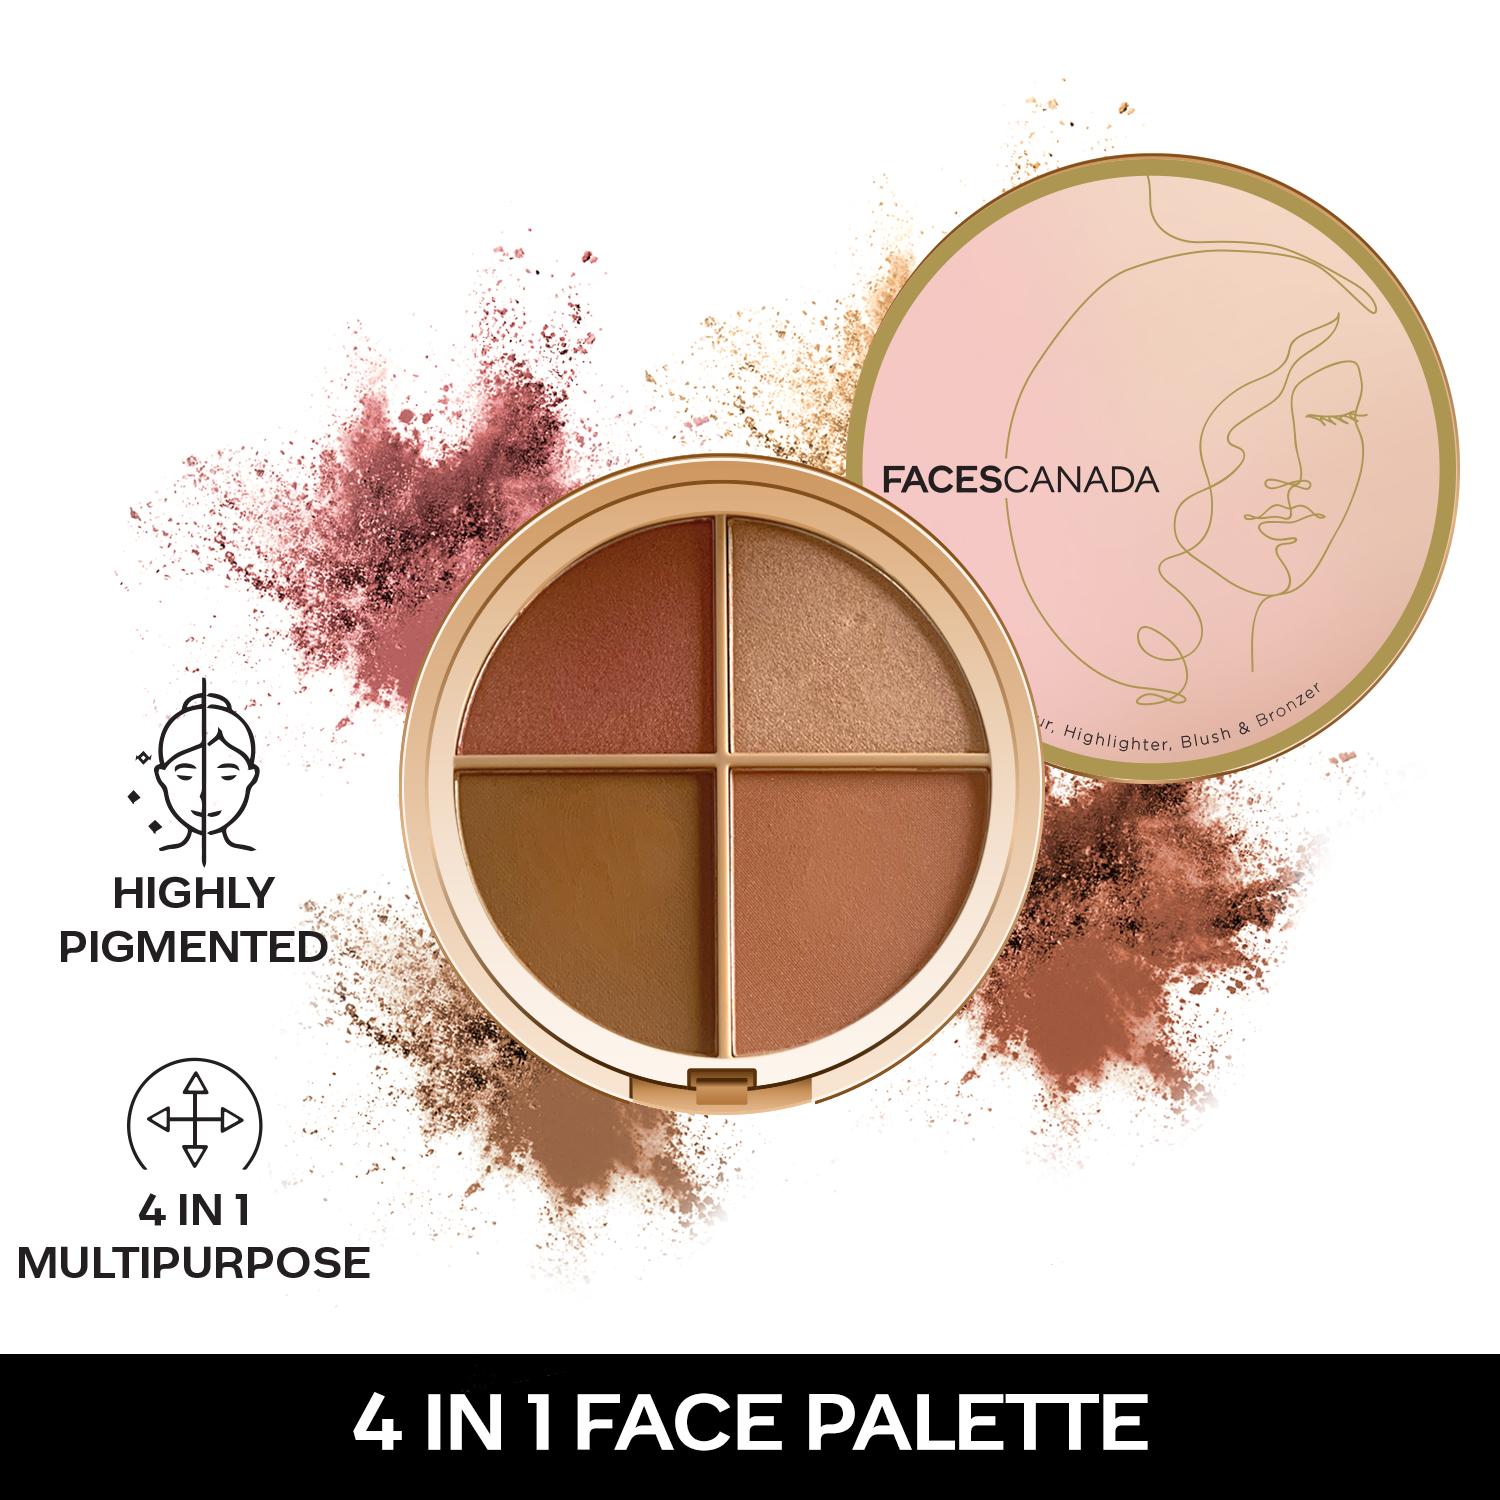 Faces Canada | Faces Canada Second Skin 4 in 1 Face Palette, Blush + Contour + Highligher, Velvet Finish (14.5 g)